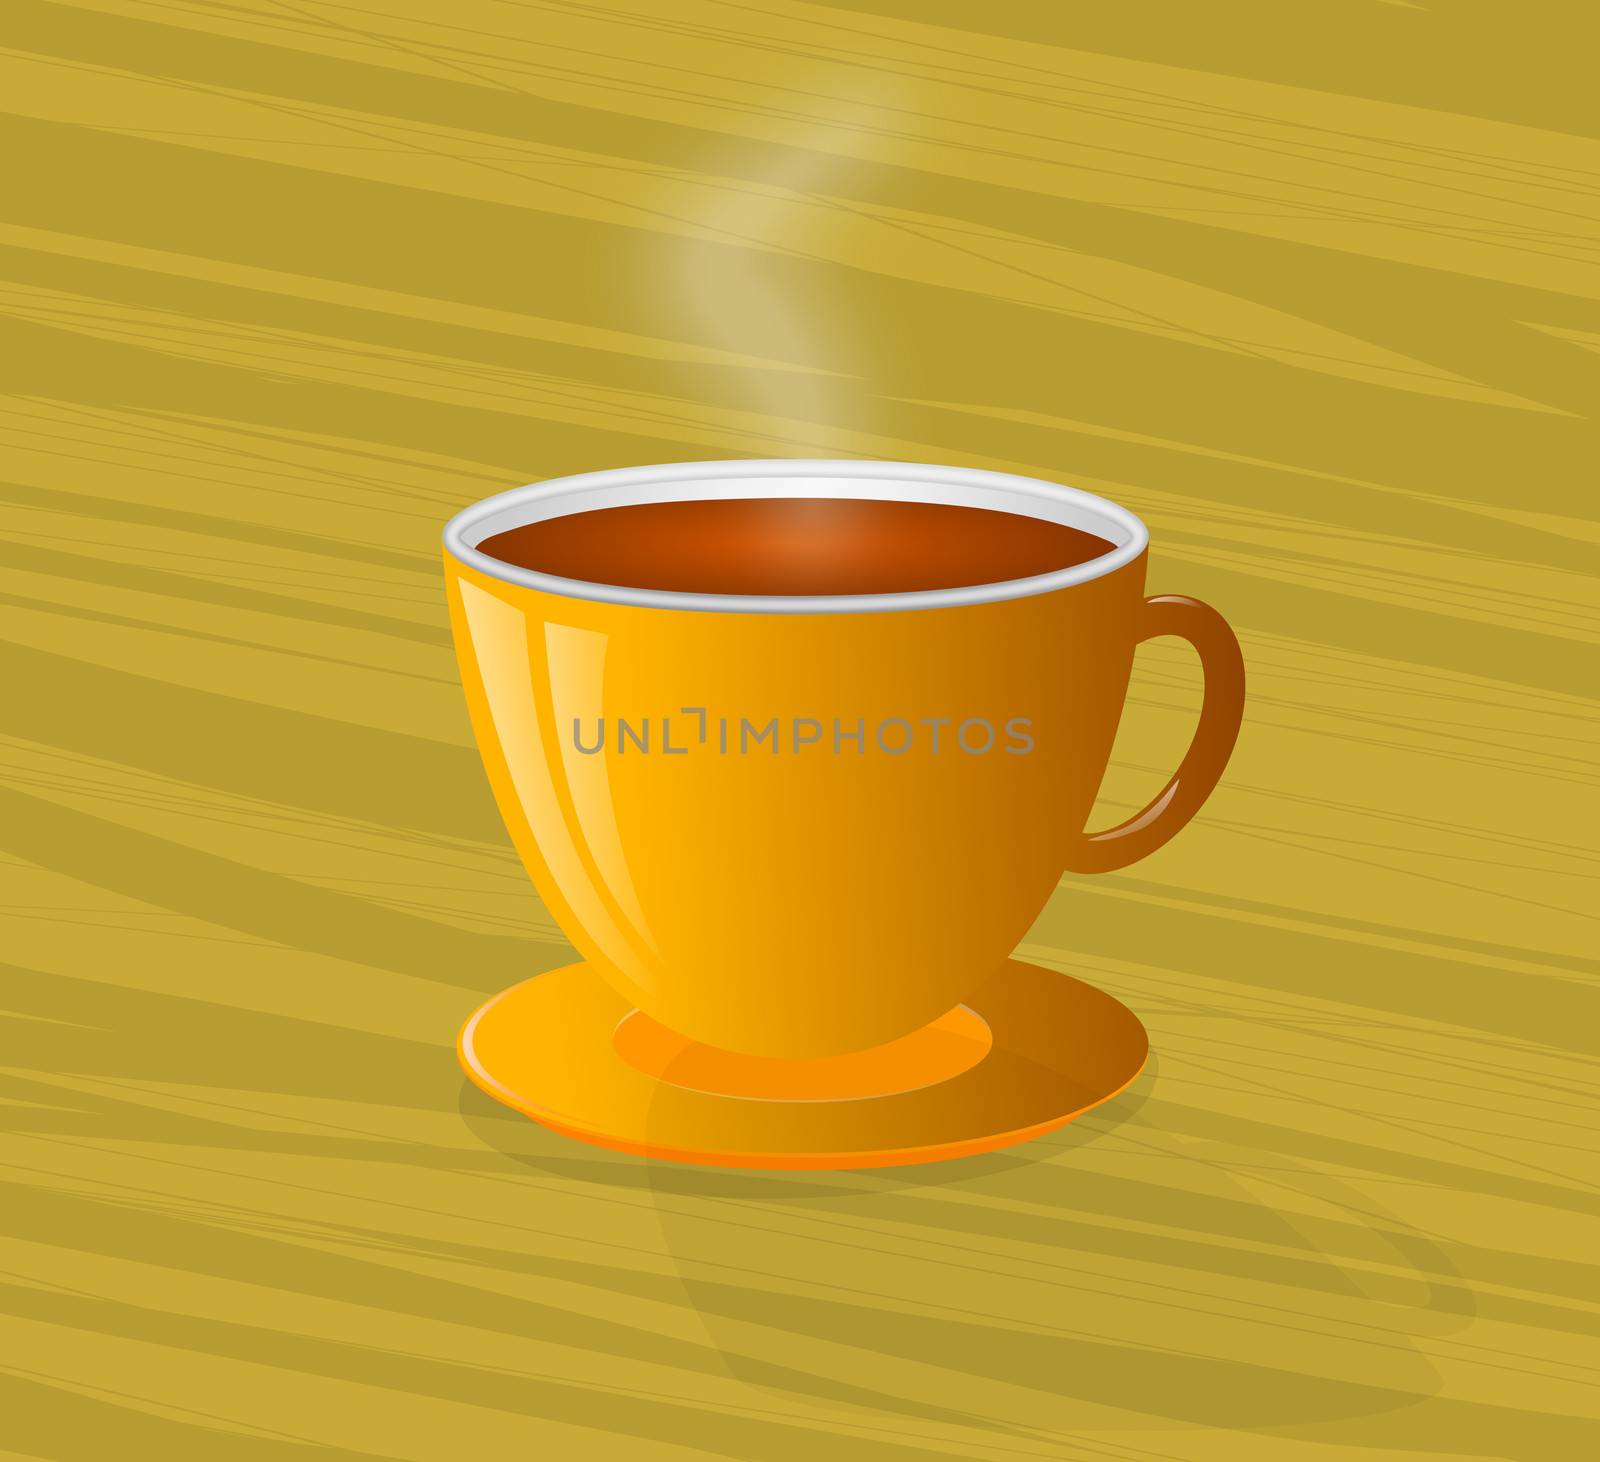 Steaming Hot Coffee in a Yellow Cup by RichieThakur